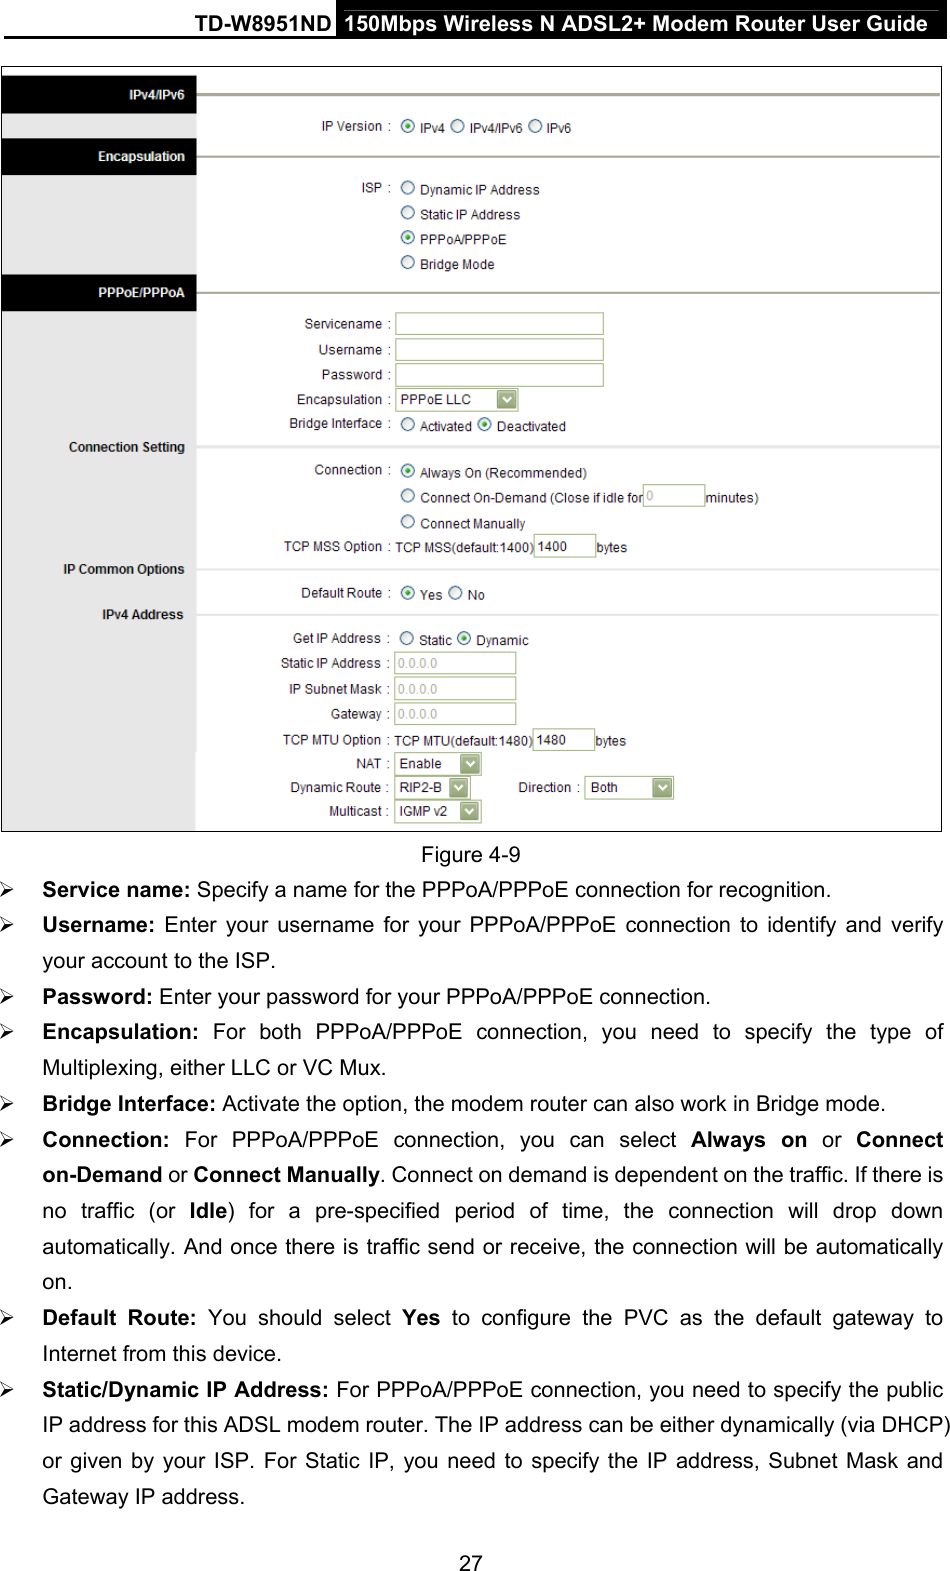 TD-W8951ND  150Mbps Wireless N ADSL2+ Modem Router User Guide  Figure 4-9  Service name: Specify a name for the PPPoA/PPPoE connection for recognition.    Username:  Enter your username for your PPPoA/PPPoE connection to identify and verify your account to the ISP.  Password: Enter your password for your PPPoA/PPPoE connection.  Encapsulation:  For both PPPoA/PPPoE connection, you need to specify the type of Multiplexing, either LLC or VC Mux.  Bridge Interface: Activate the option, the modem router can also work in Bridge mode.  Connection: For PPPoA/PPPoE connection, you can select Always on or Connect on-Demand or Connect Manually. Connect on demand is dependent on the traffic. If there is no traffic (or Idle) for a pre-specified period of time, the connection will drop down automatically. And once there is traffic send or receive, the connection will be automatically on.  Default Route: You should select Yes to configure the PVC as the default gateway to Internet from this device.  Static/Dynamic IP Address: For PPPoA/PPPoE connection, you need to specify the public IP address for this ADSL modem router. The IP address can be either dynamically (via DHCP) or given by your ISP. For Static IP, you need to specify the IP address, Subnet Mask and Gateway IP address. 27 